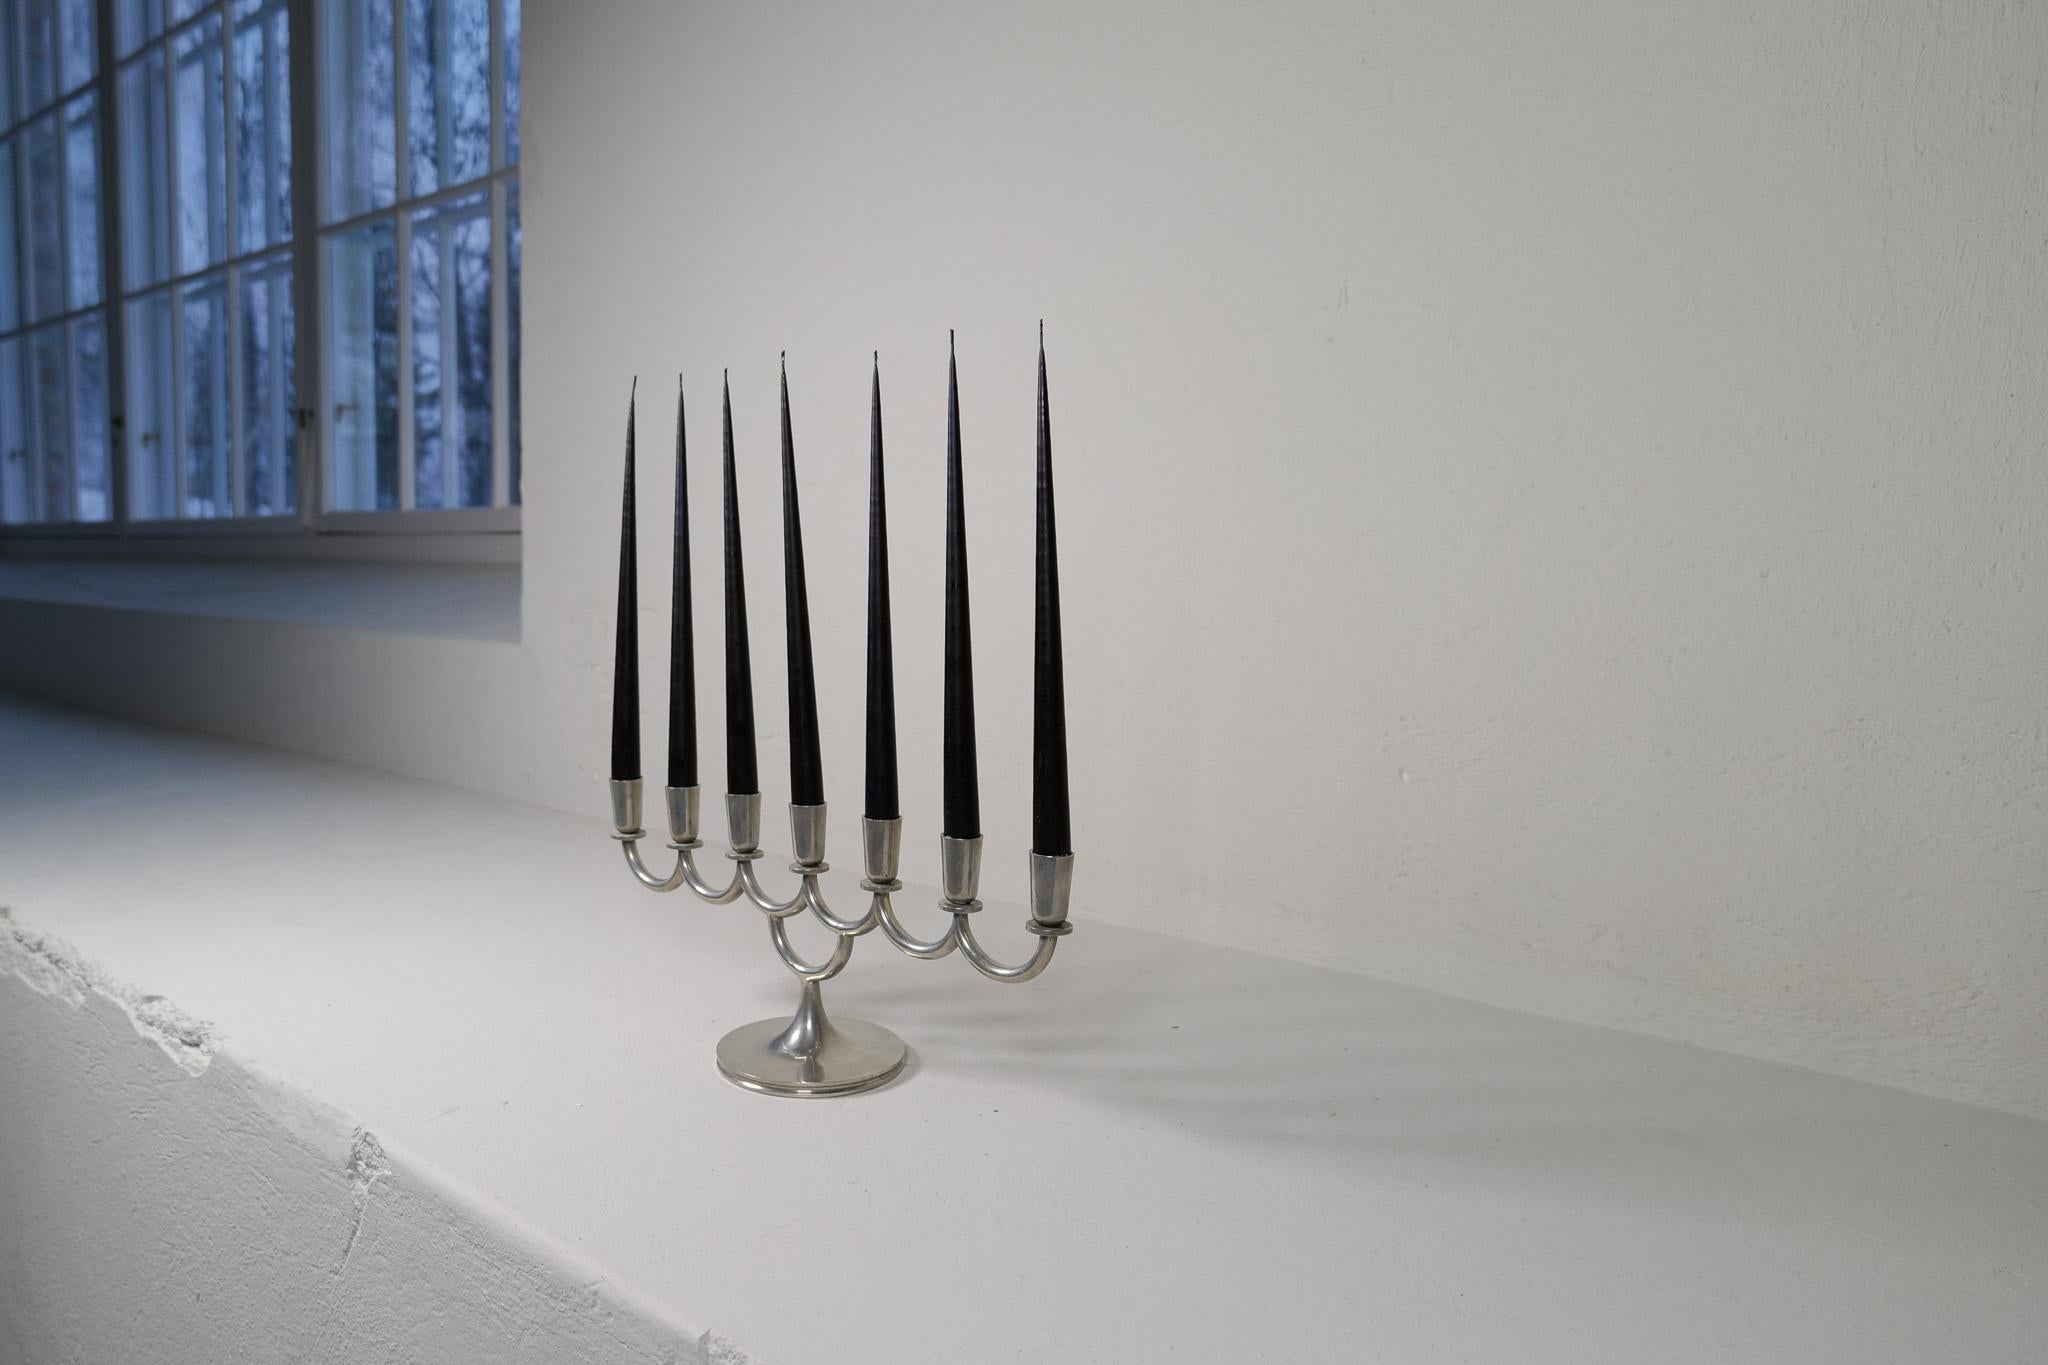 Hand-Crafted Art Deco Candelabra in Pewter by Lars Holmström in Arvika, Sweden, 1931 For Sale